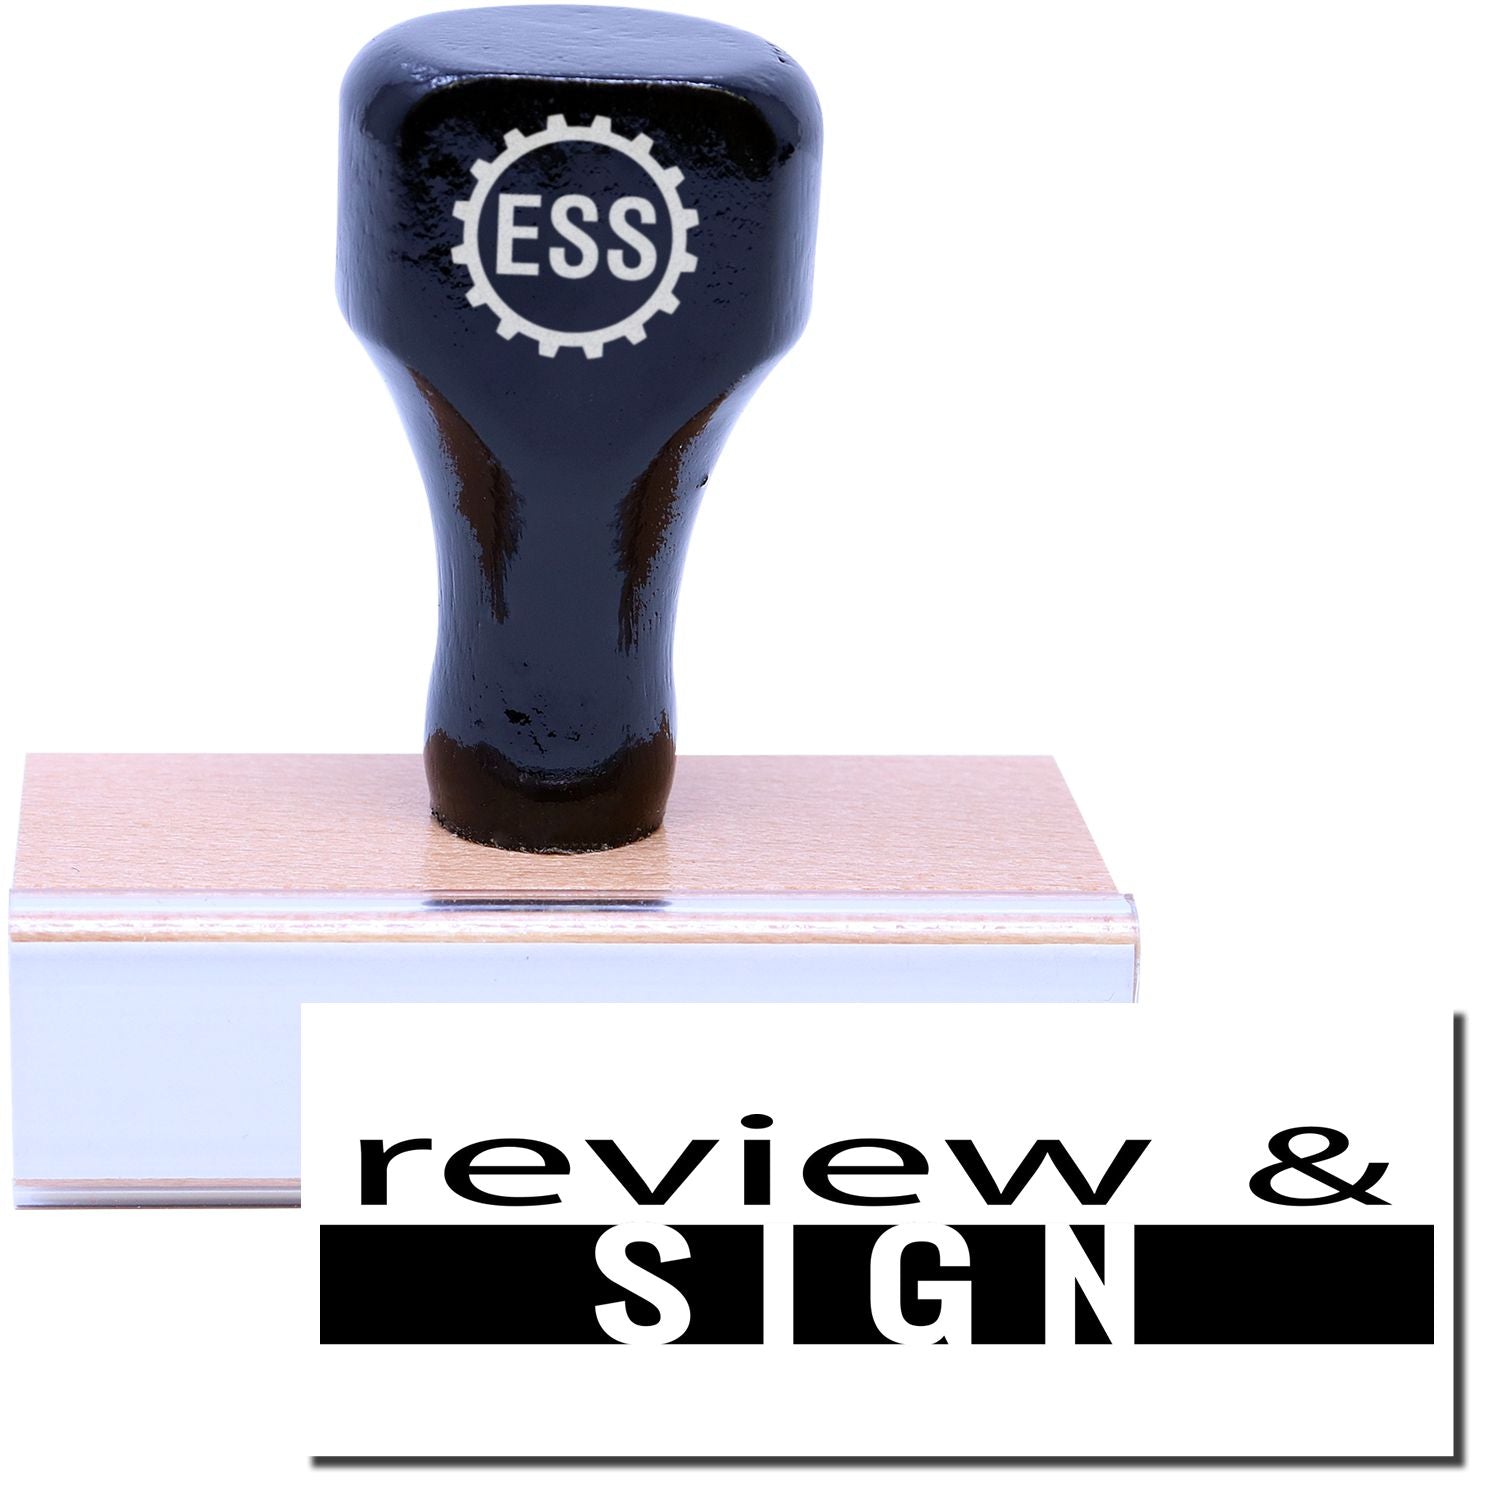 A stock office rubber stamp with a stamped image showing how the text "review & SIGN" in a bold font and dual-colored marking is displayed after stamping.